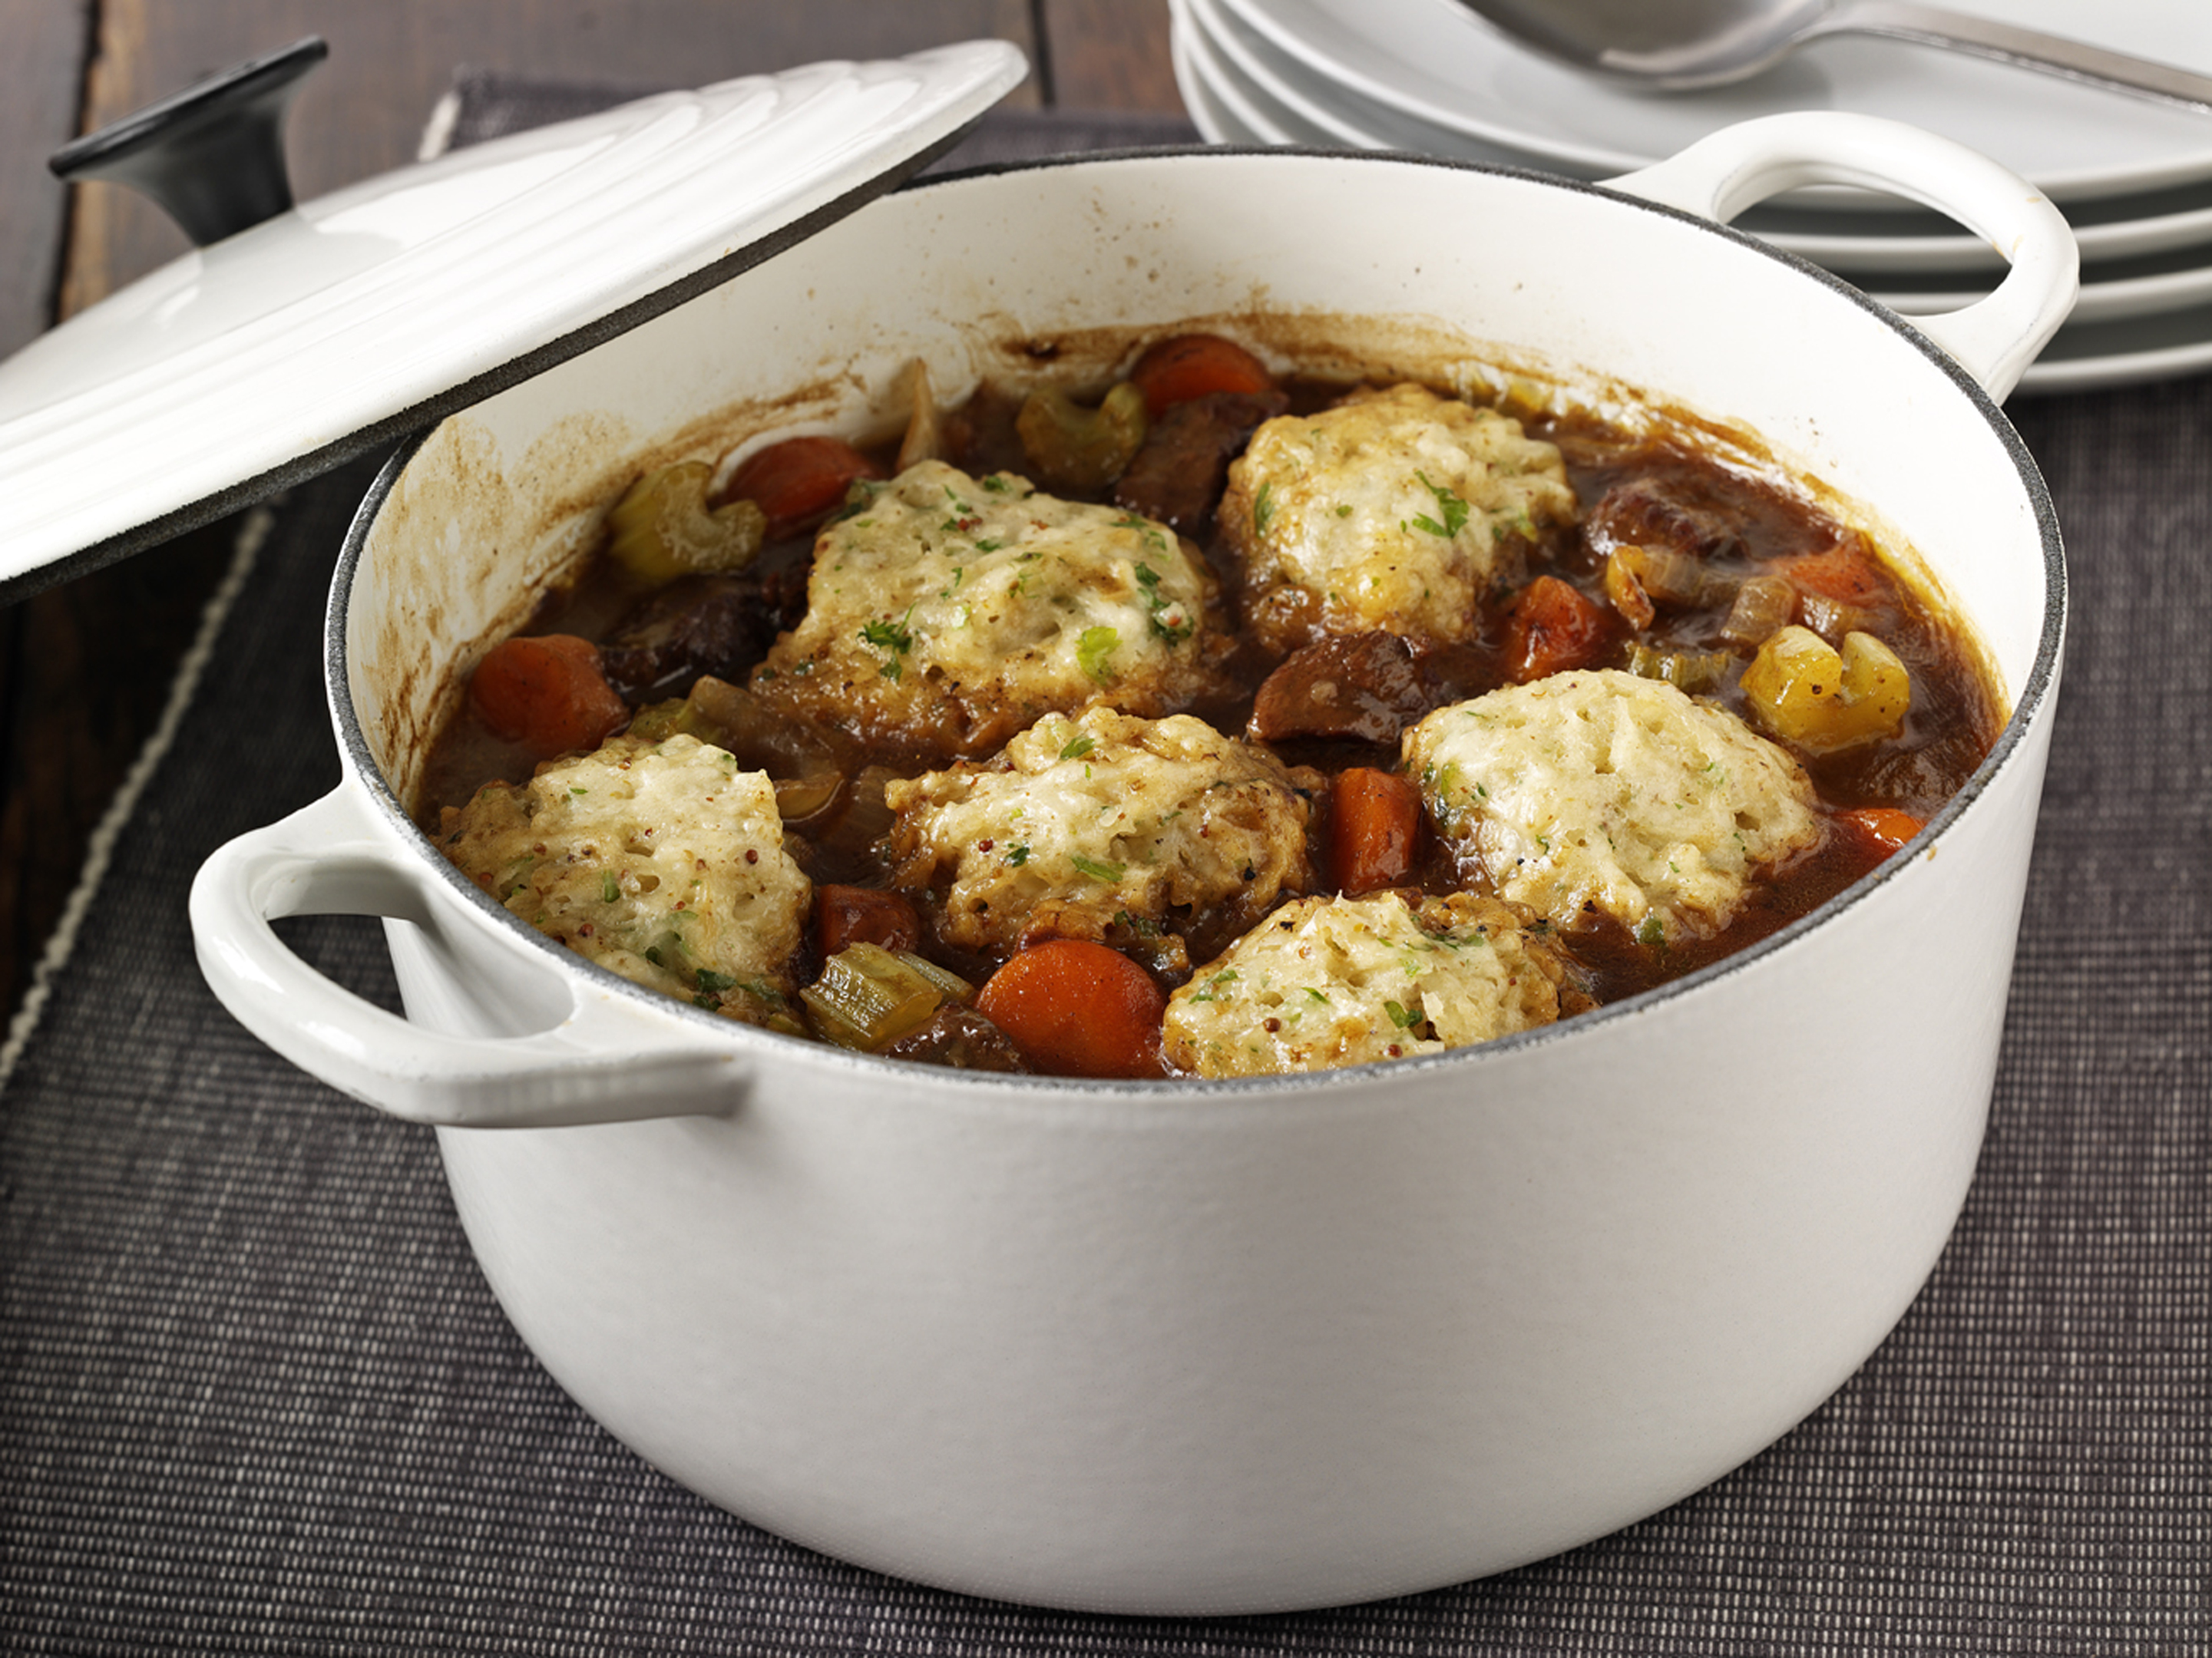 Beef and beer casserole (Tracklements)